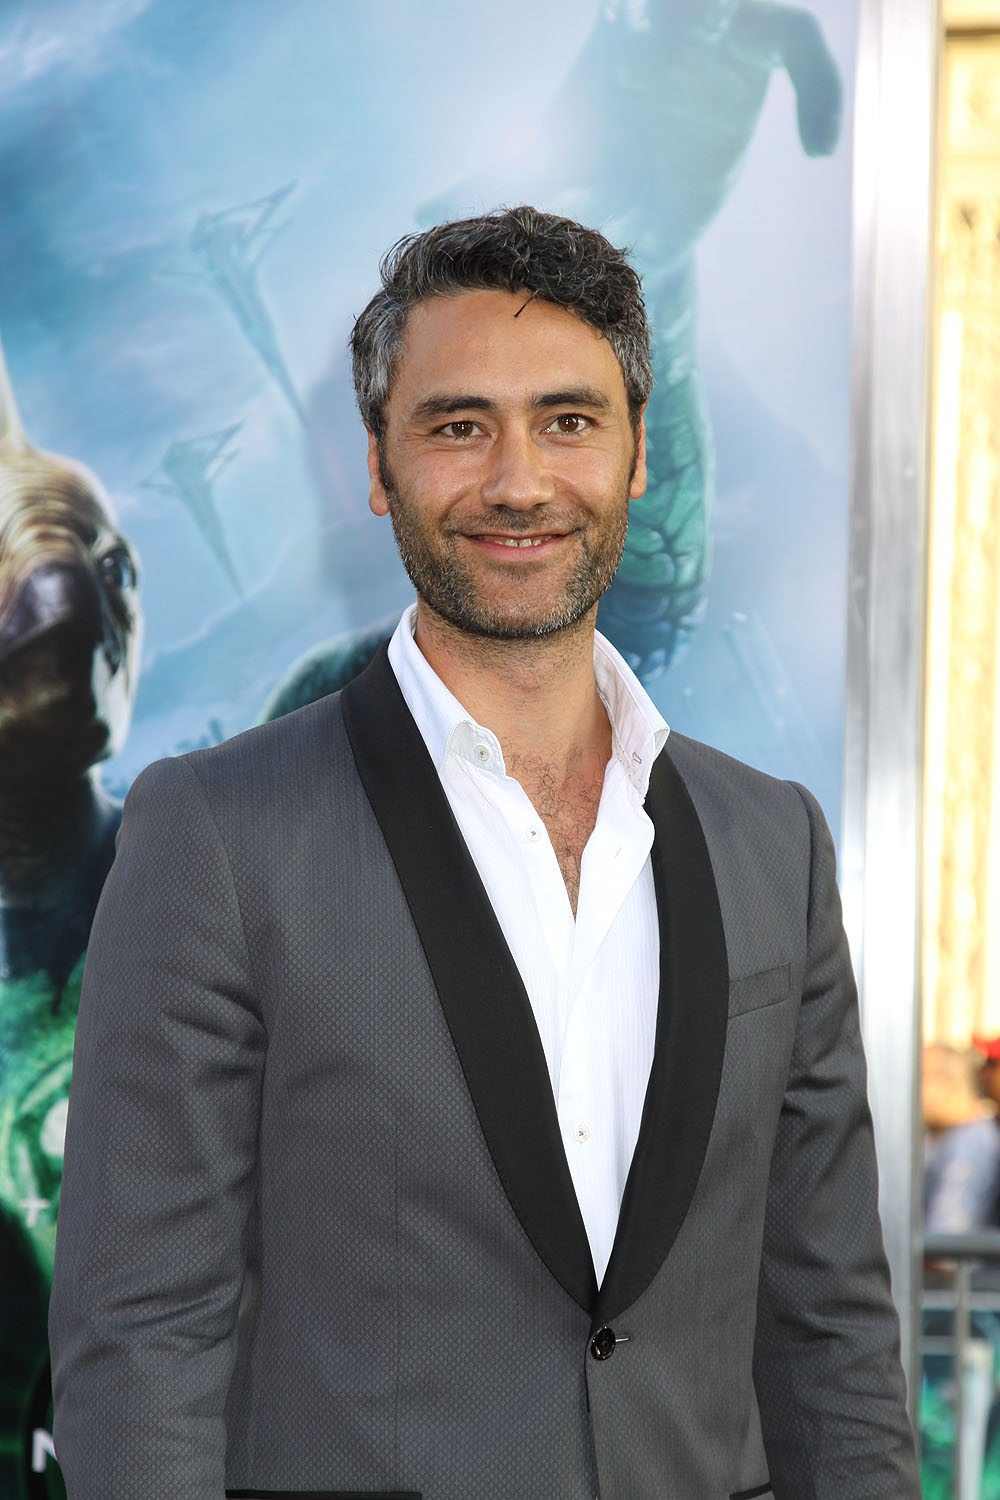 Taika Waititi at the Los Angeles Premiere of GREEN LANTERN, June 15, 2011 at the Grauman's Chinese Theatre, Hollywood. Photo Credit Sue Schneider_MGP Agency